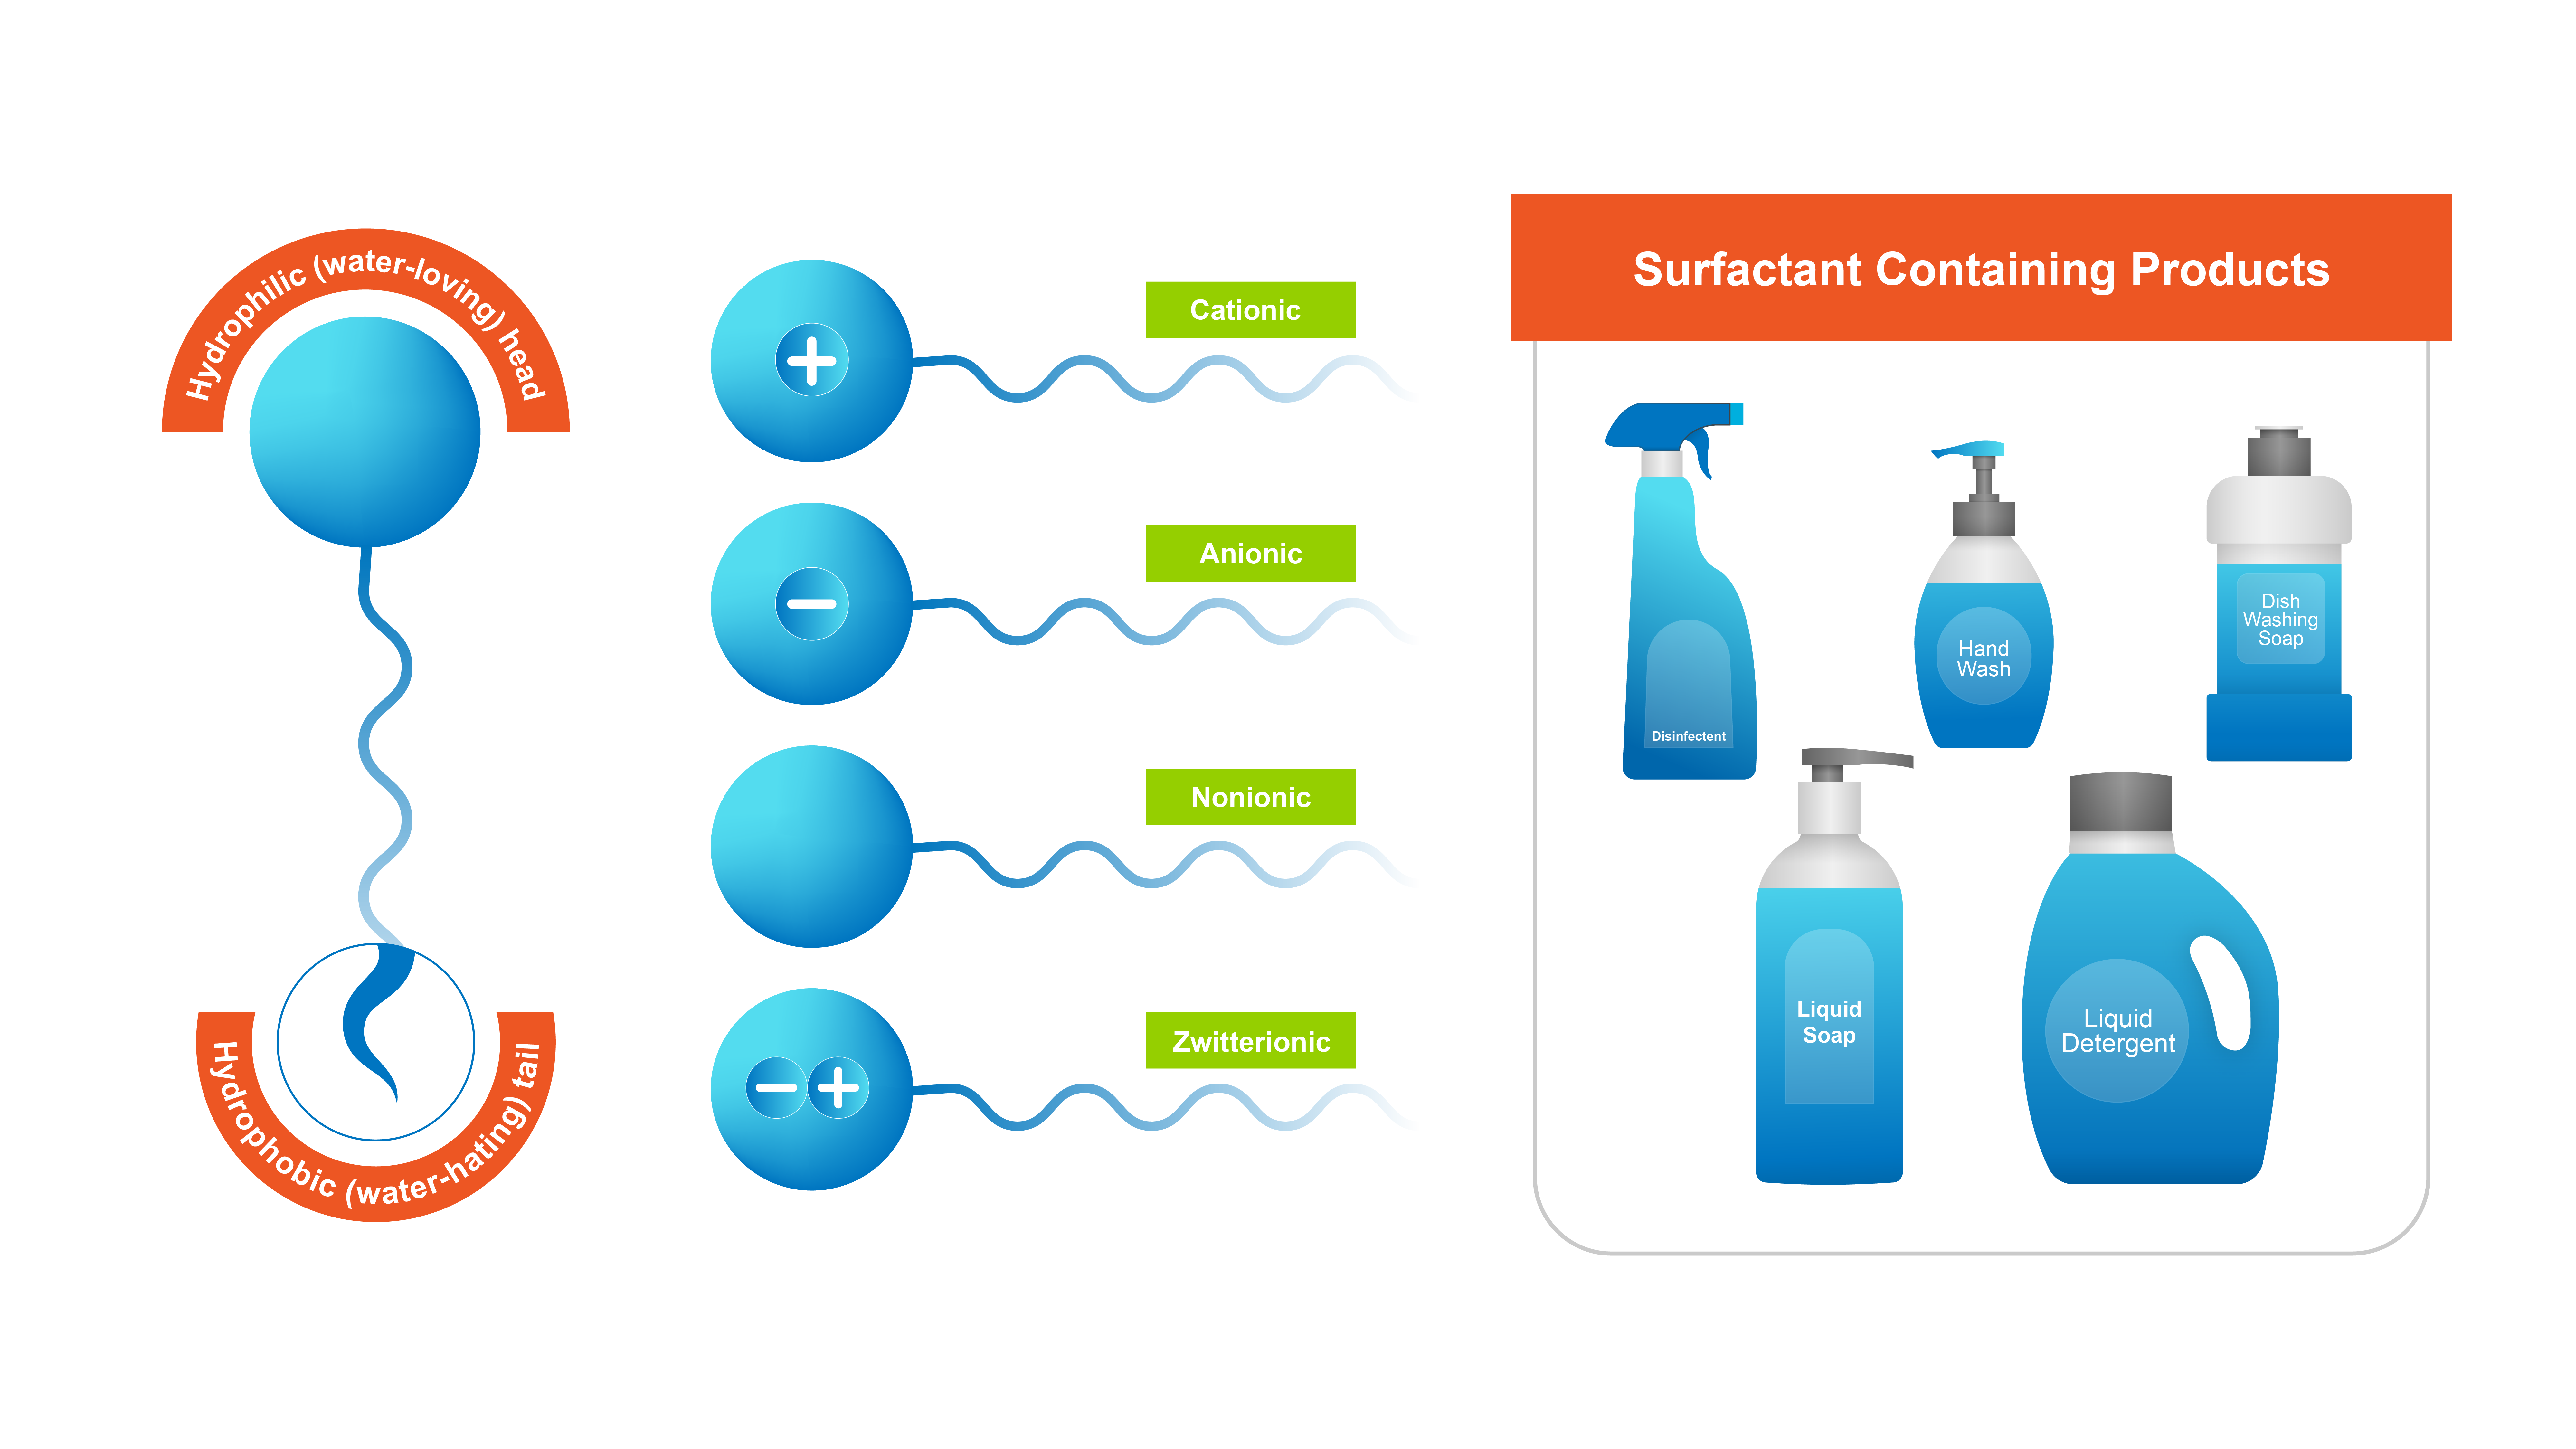 What are surfactants